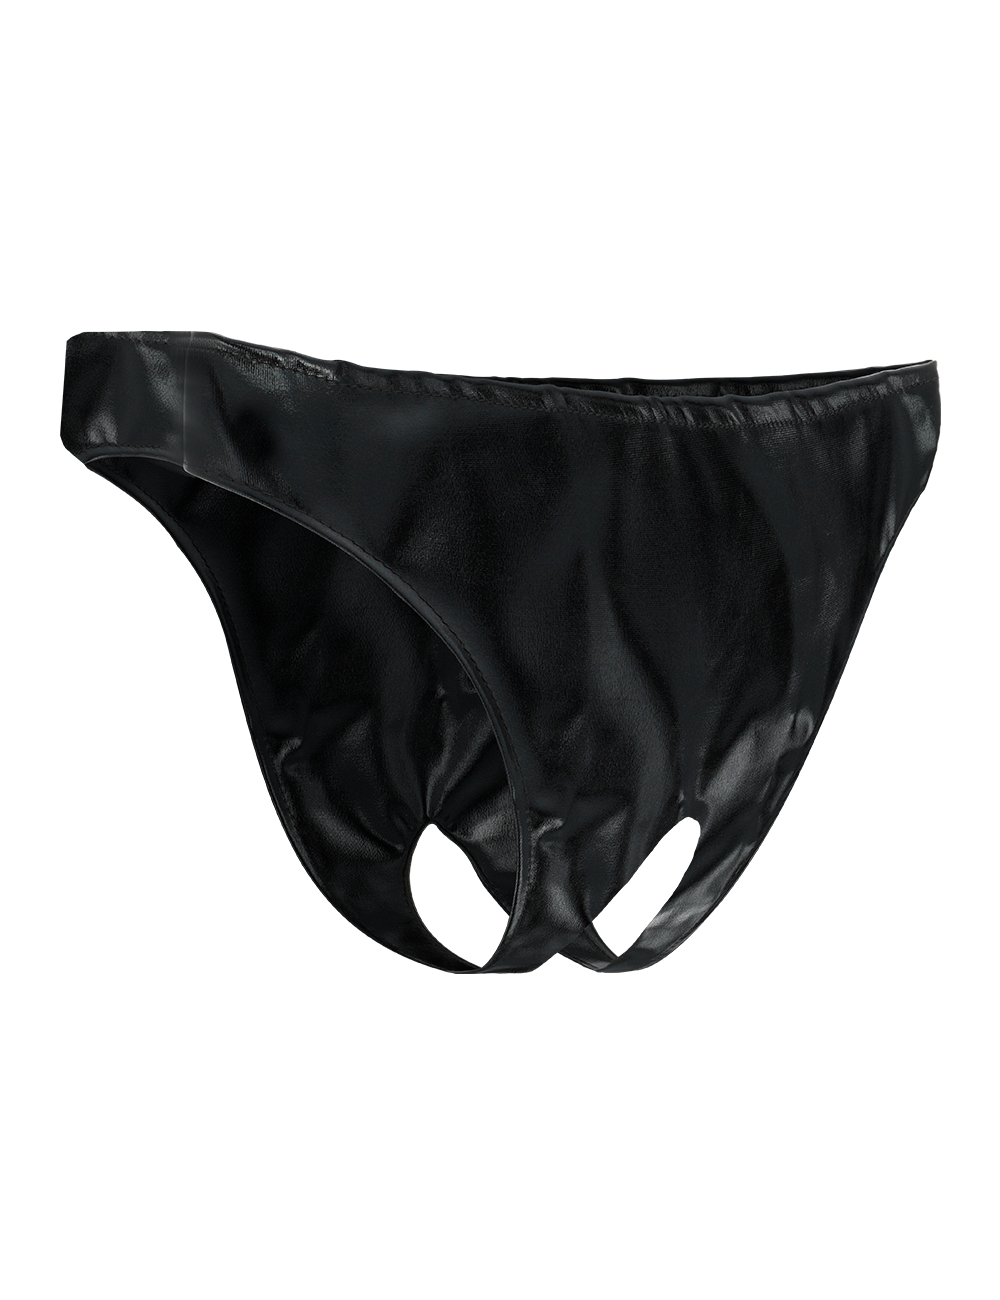 Lingerie - Boxers, strings, culottes - CULOTTE DARKNESS OPEN CROTHLESS UNE TAILLE - Darkness Sensations